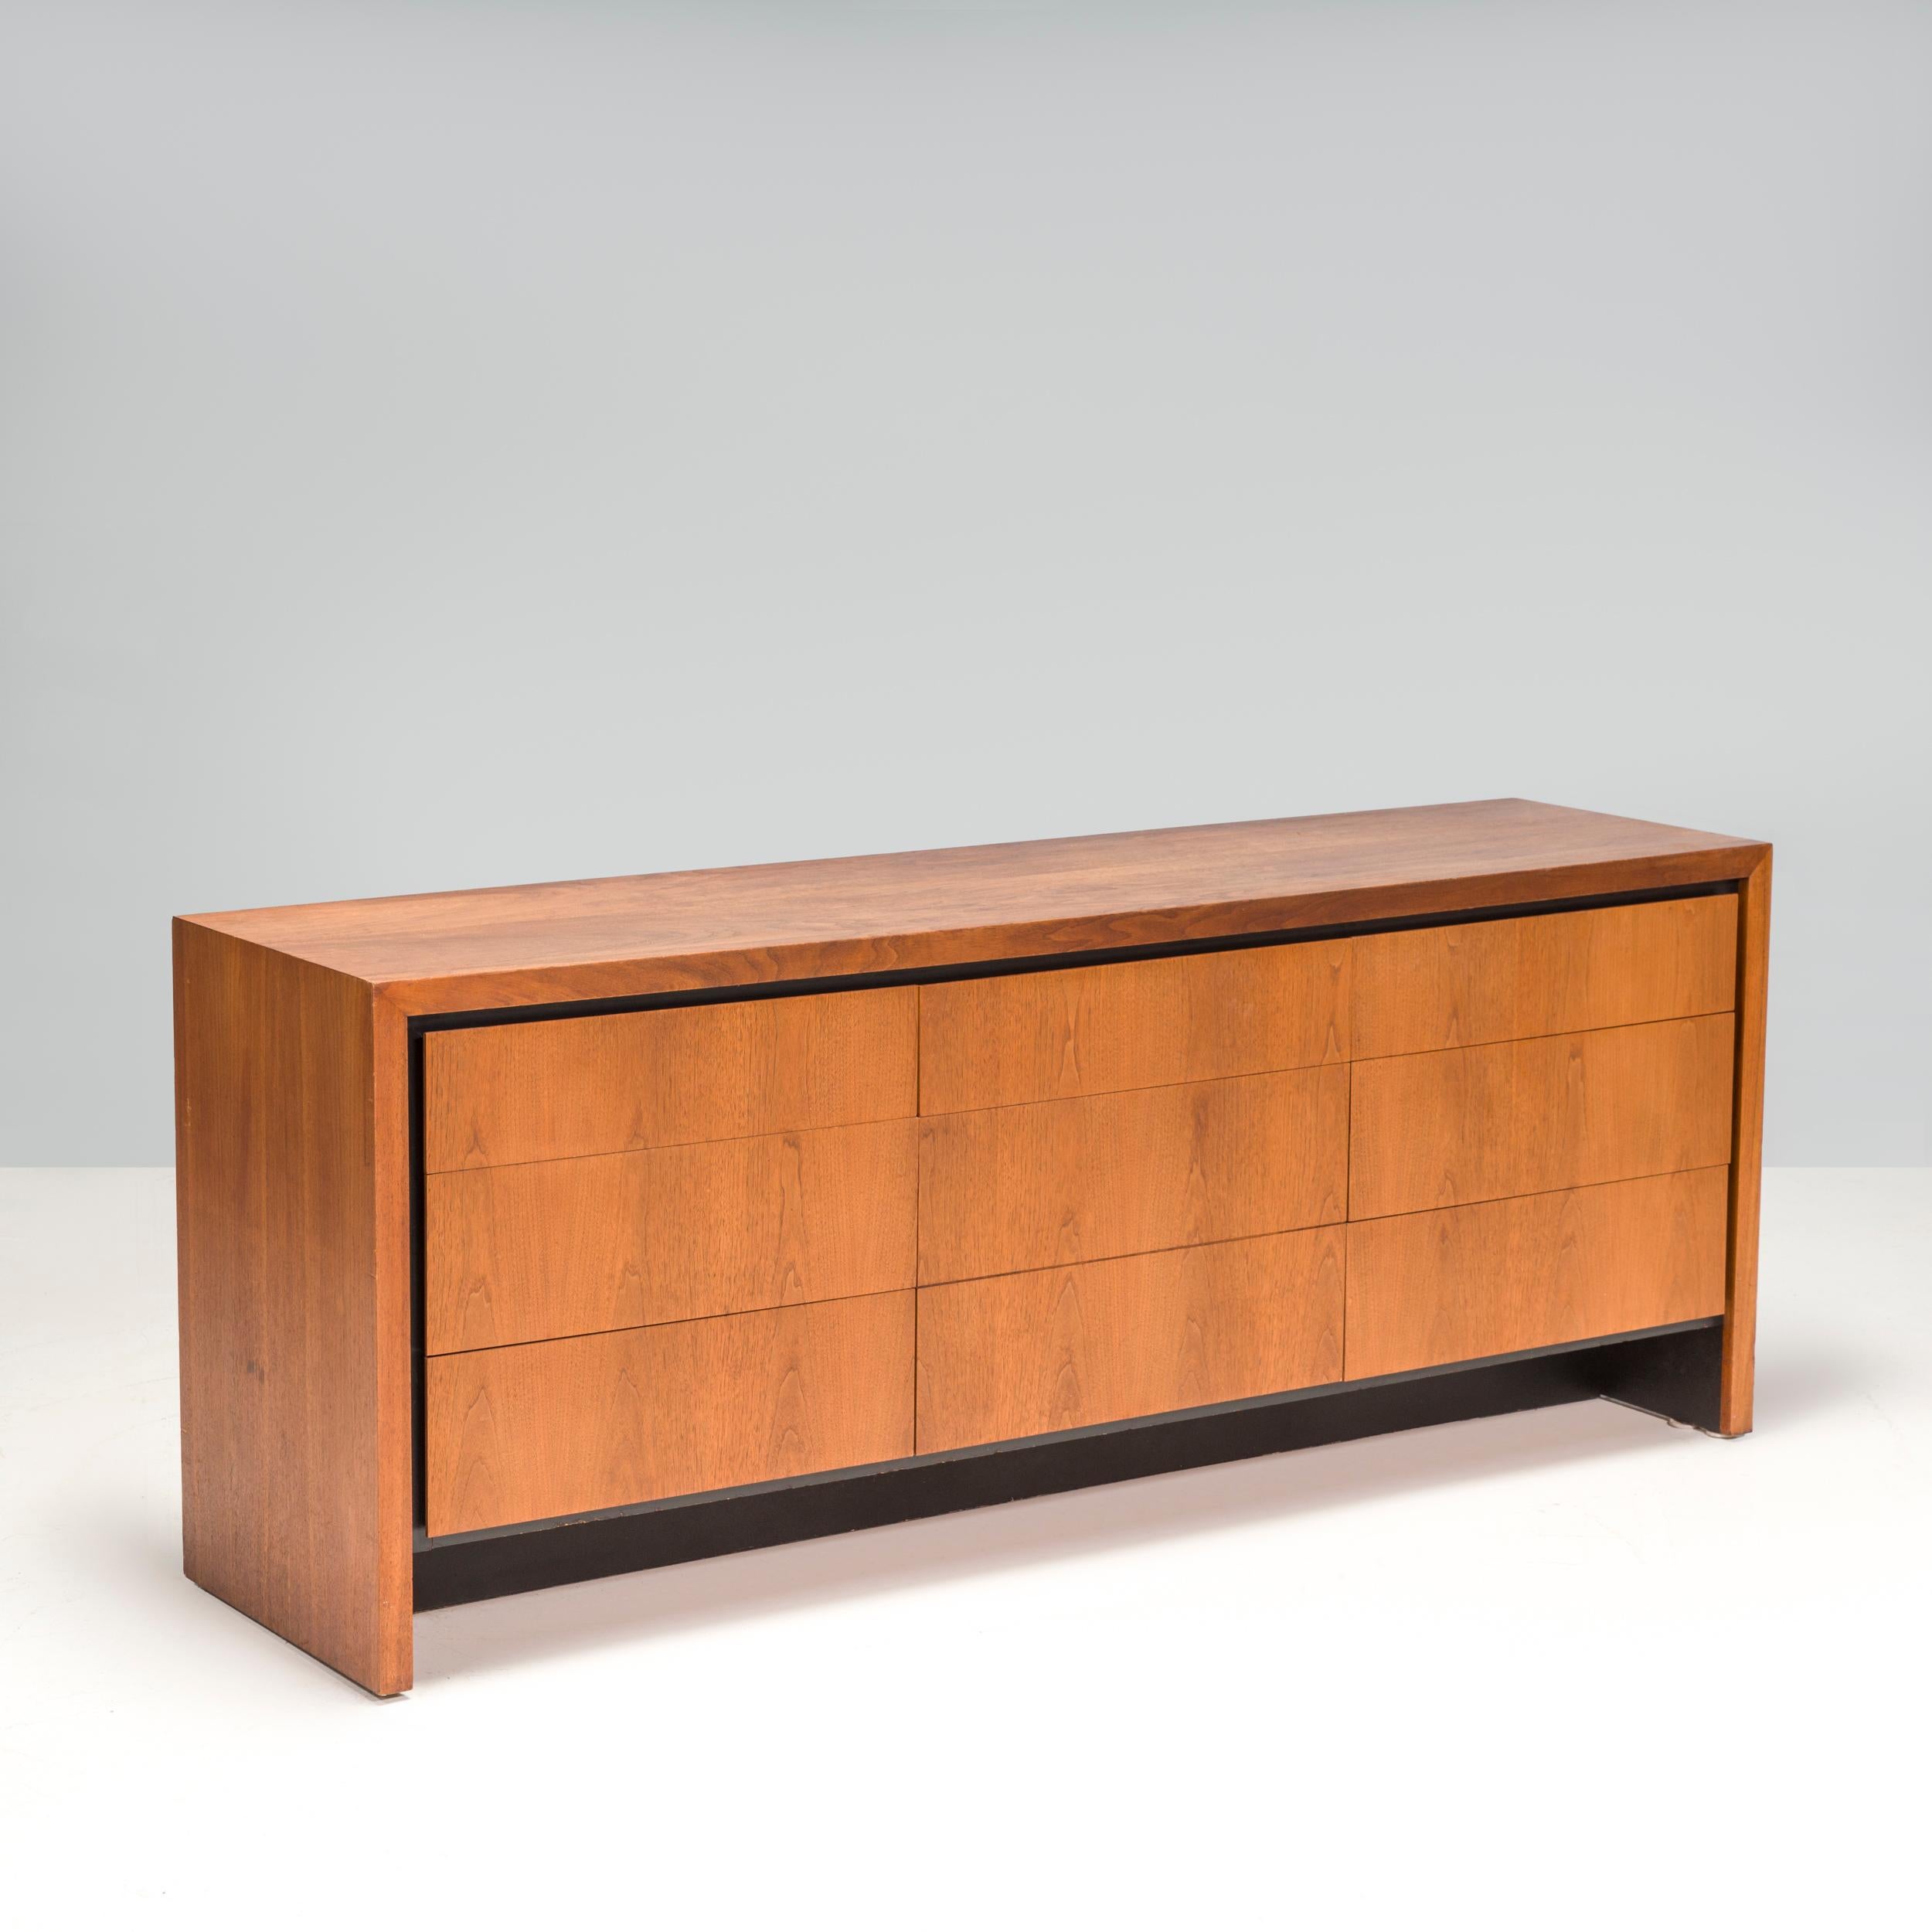 A beautiful wooden sideboard or credenza in the style of American designer Milo Baughman (1923-2003). Great for storage, this sideboard consists of 6 large drawers in walnut wood grain with a black laminate trim. 

An incredibly versatile piece,